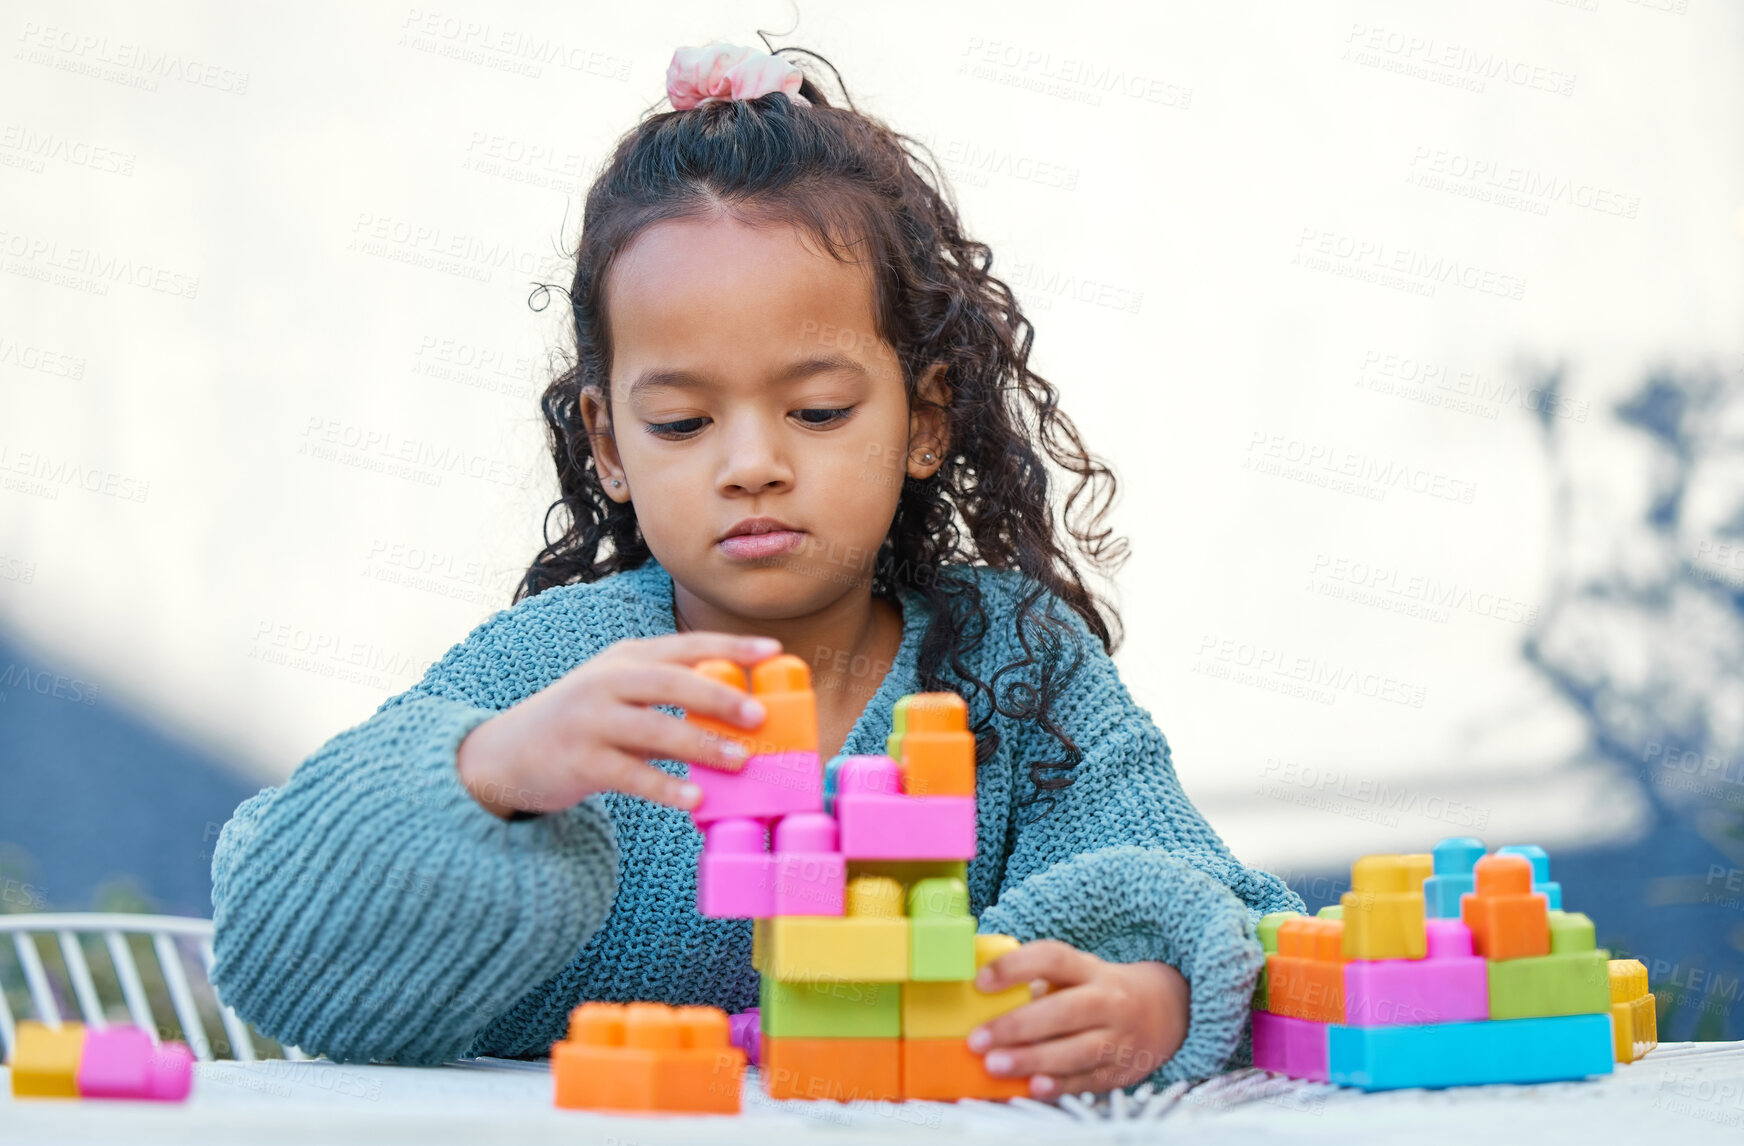 Buy stock photo Shot of a little girl playing with building blocks in her yard